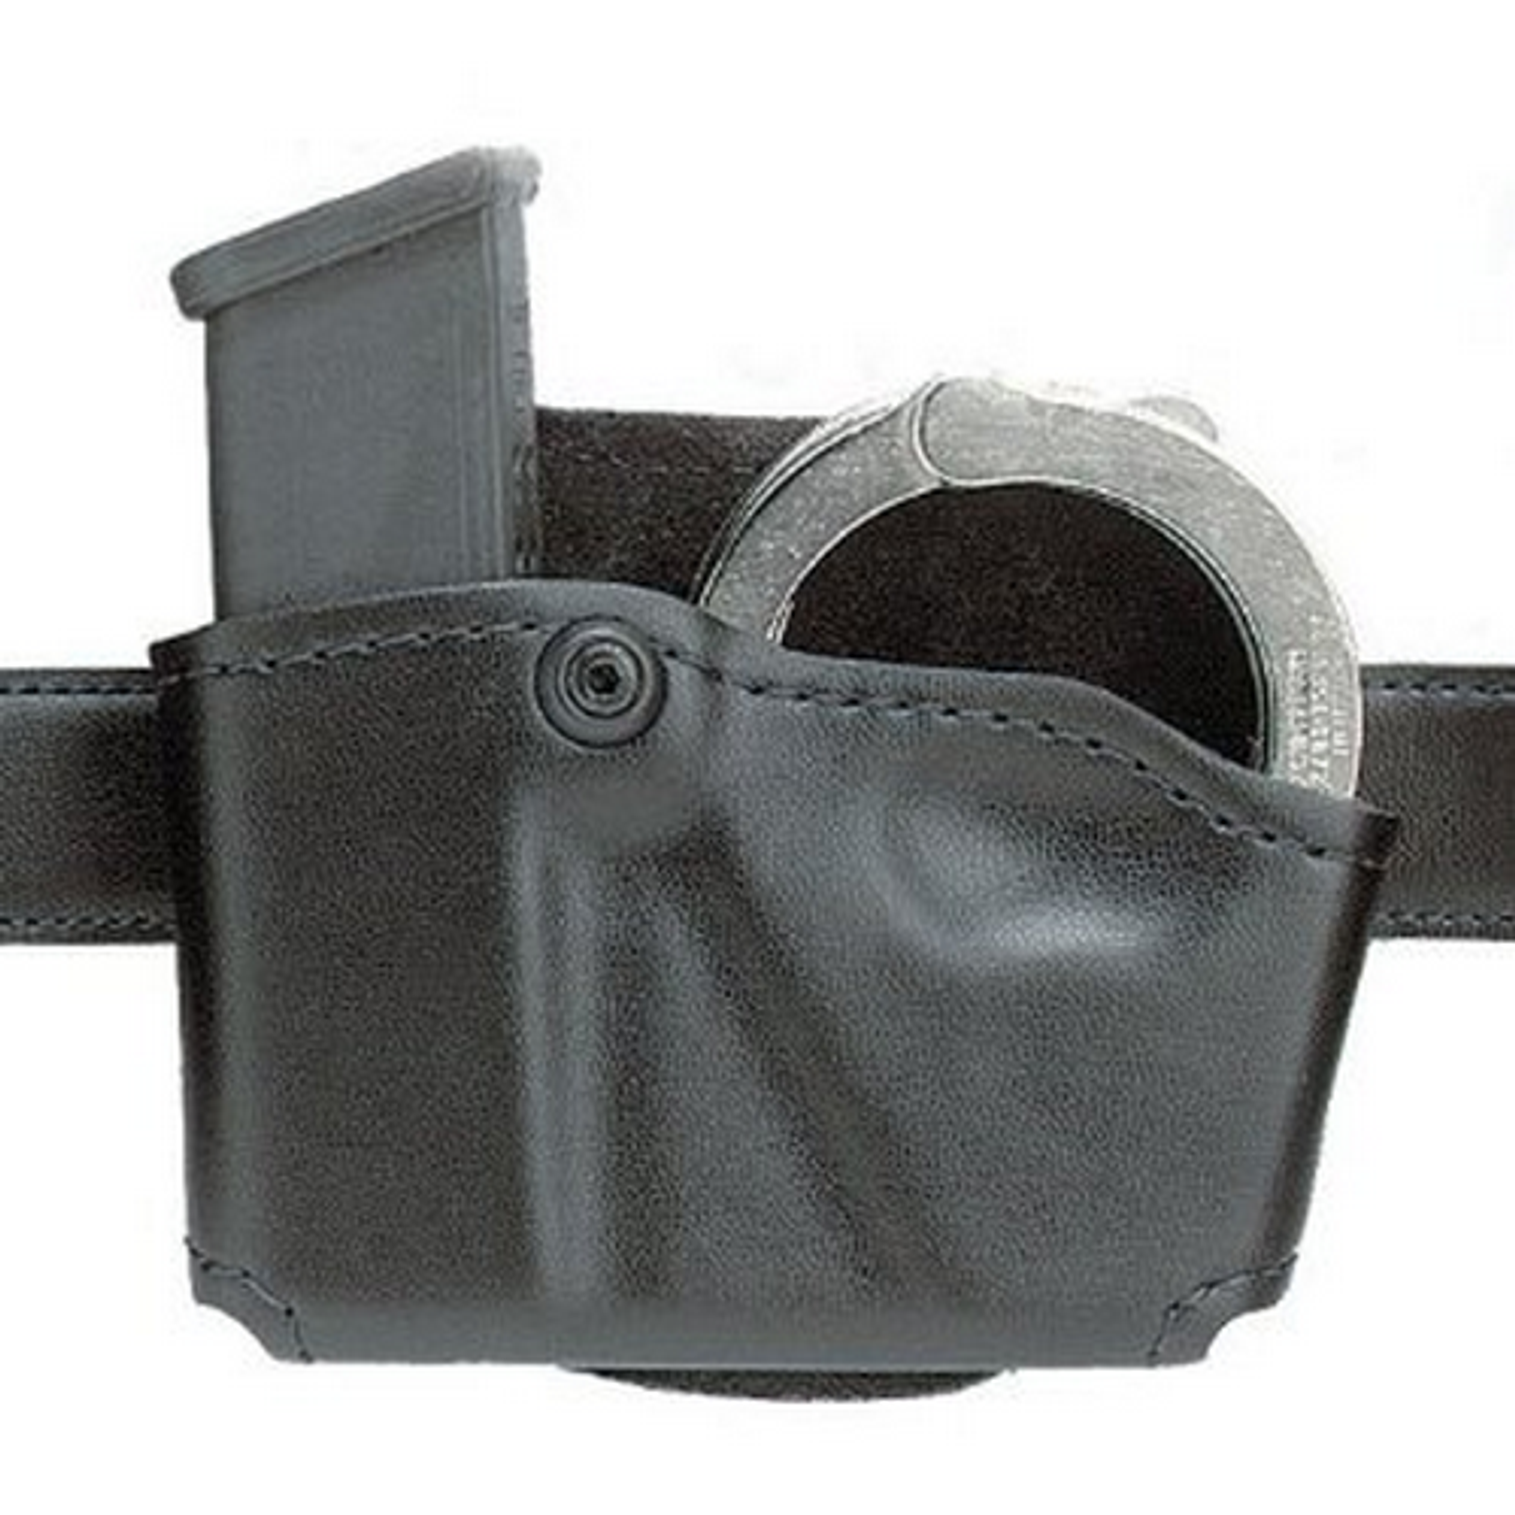 Model 573 Open Top Magazine And Handcuff Pouch - KR573-83-131